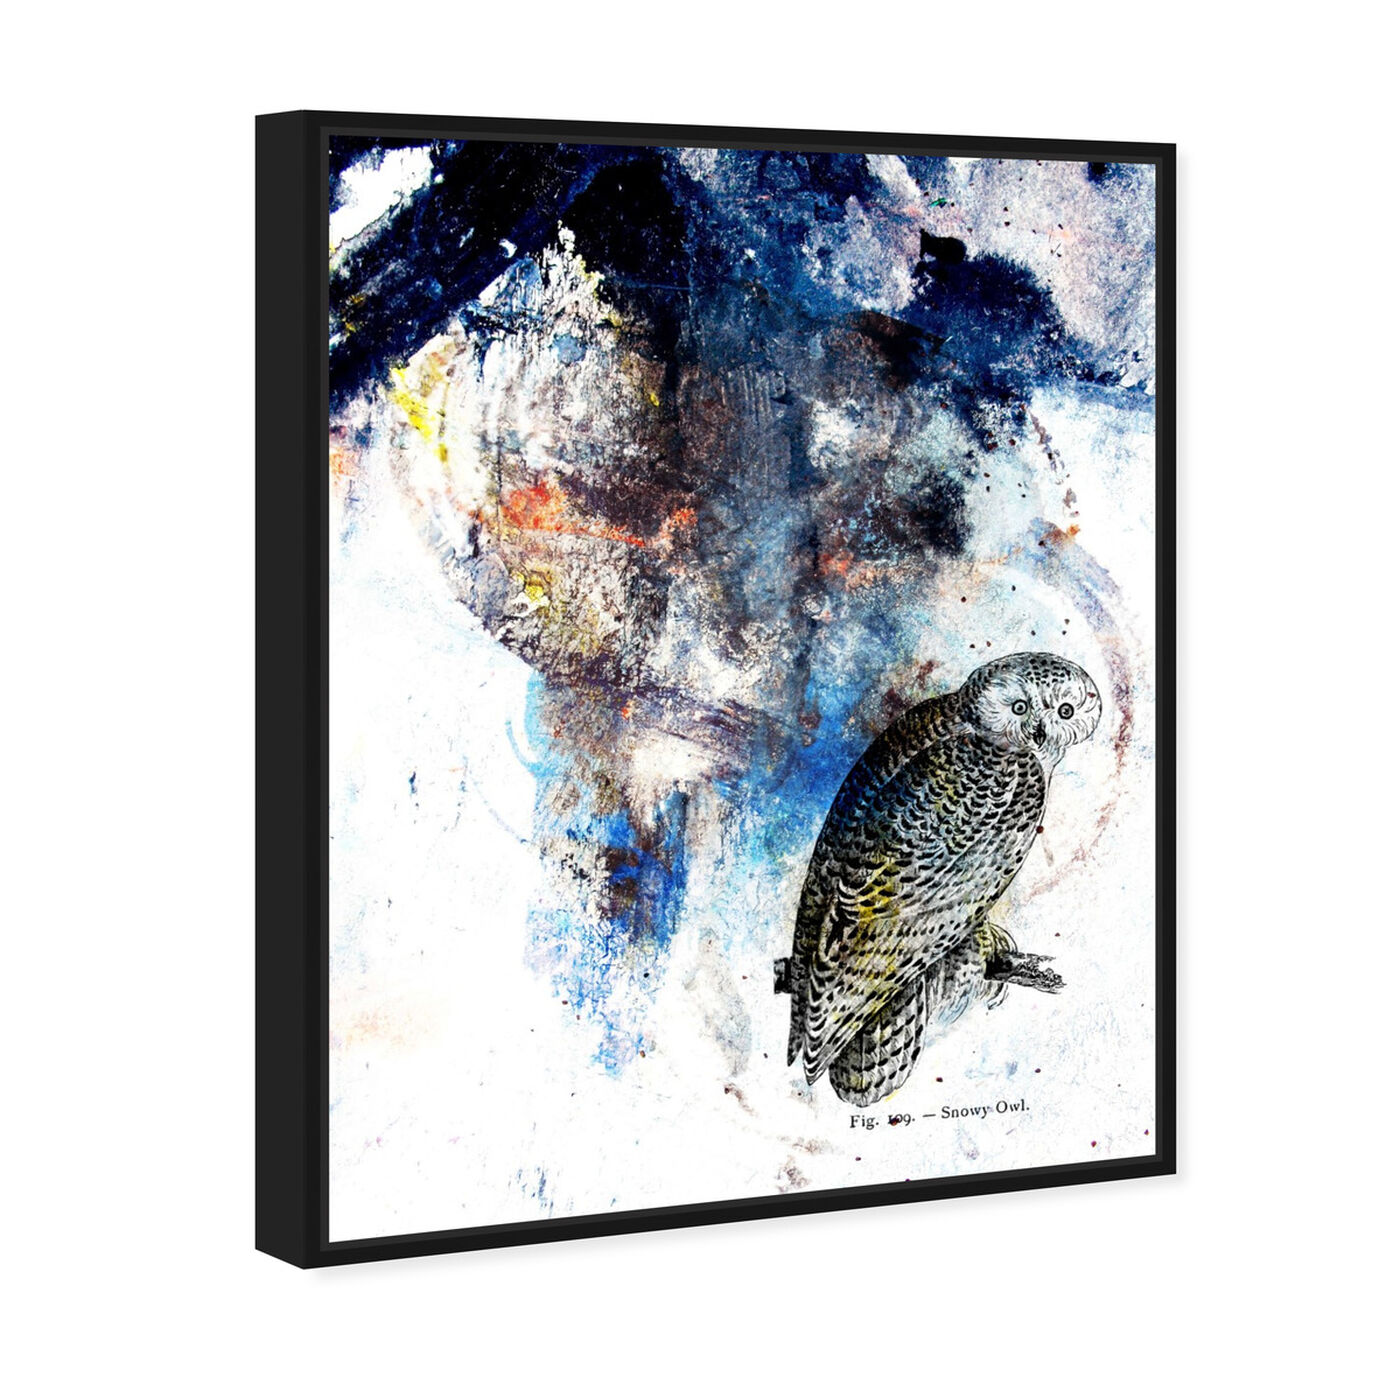 Angled view of Snowy Owl featuring animals and birds art.